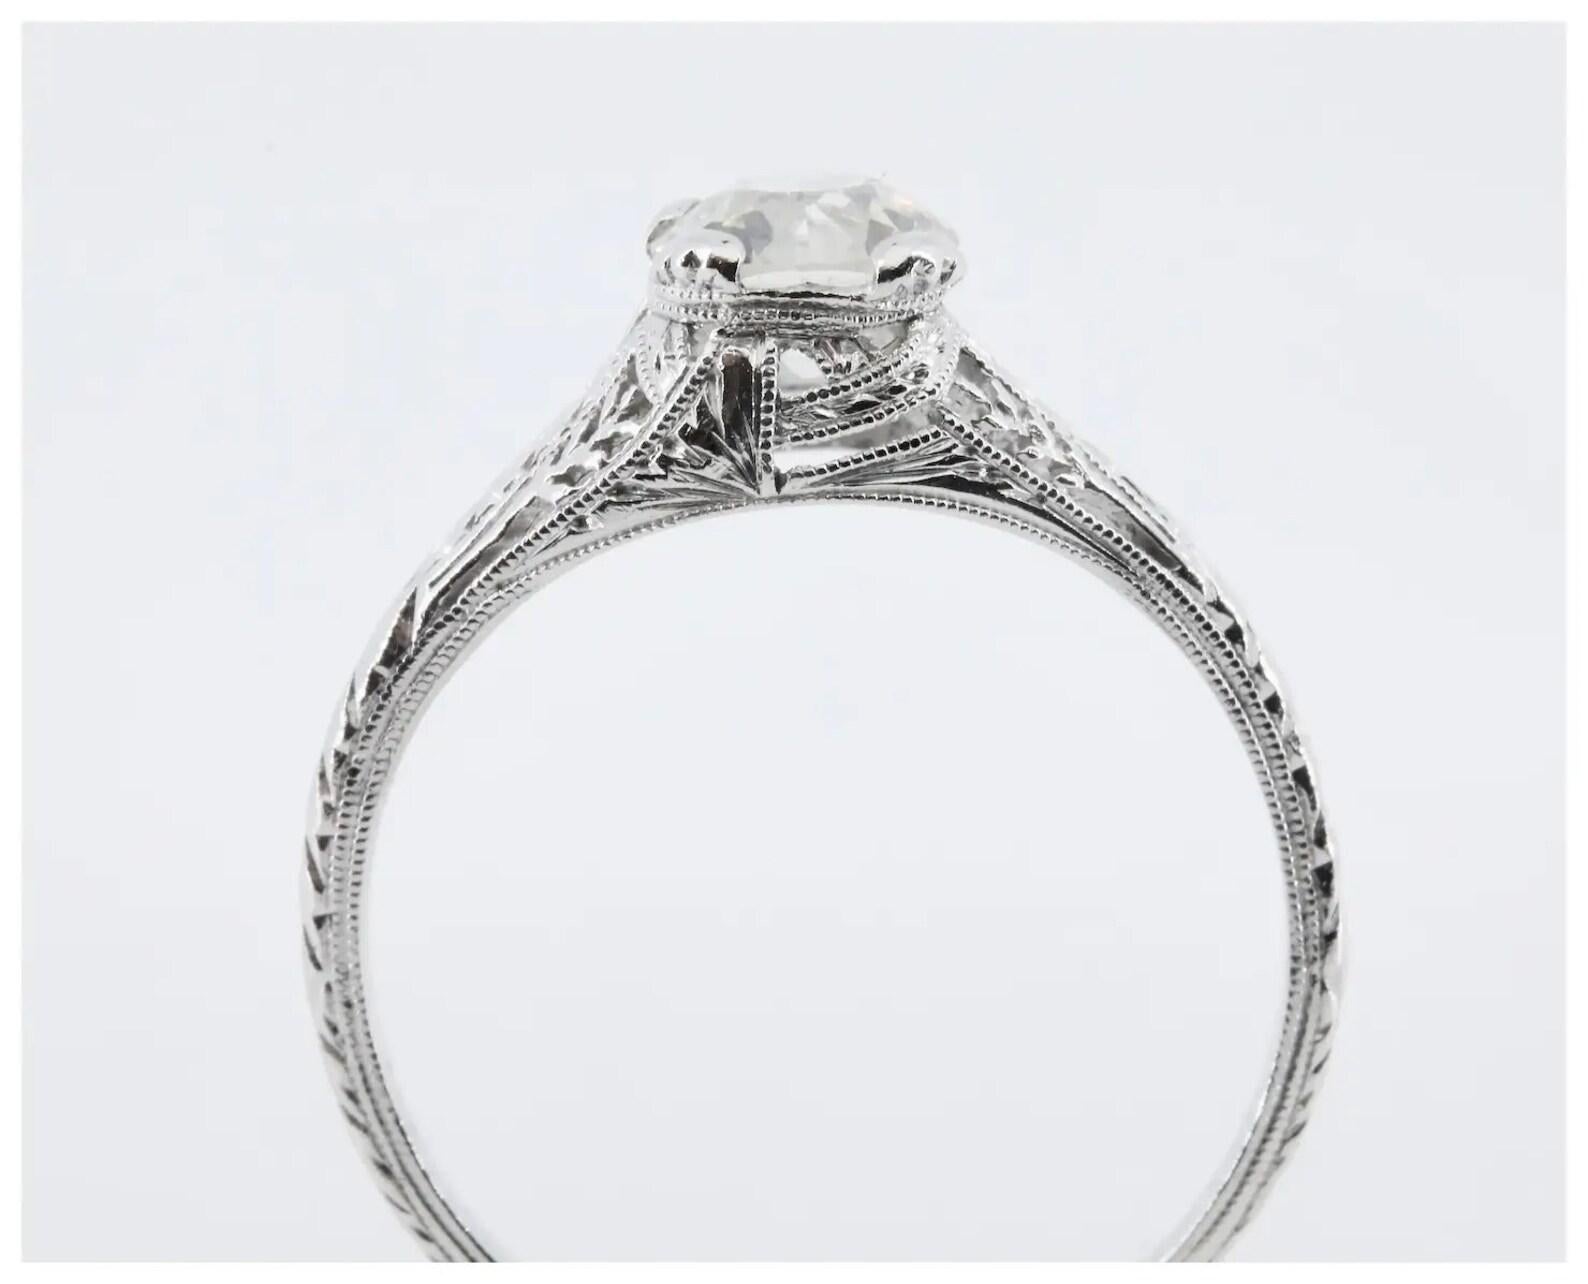 Baskin Bros. Art Deco 0.75ct Diamond Engagement Ring in Platinum In Good Condition For Sale In Boston, MA